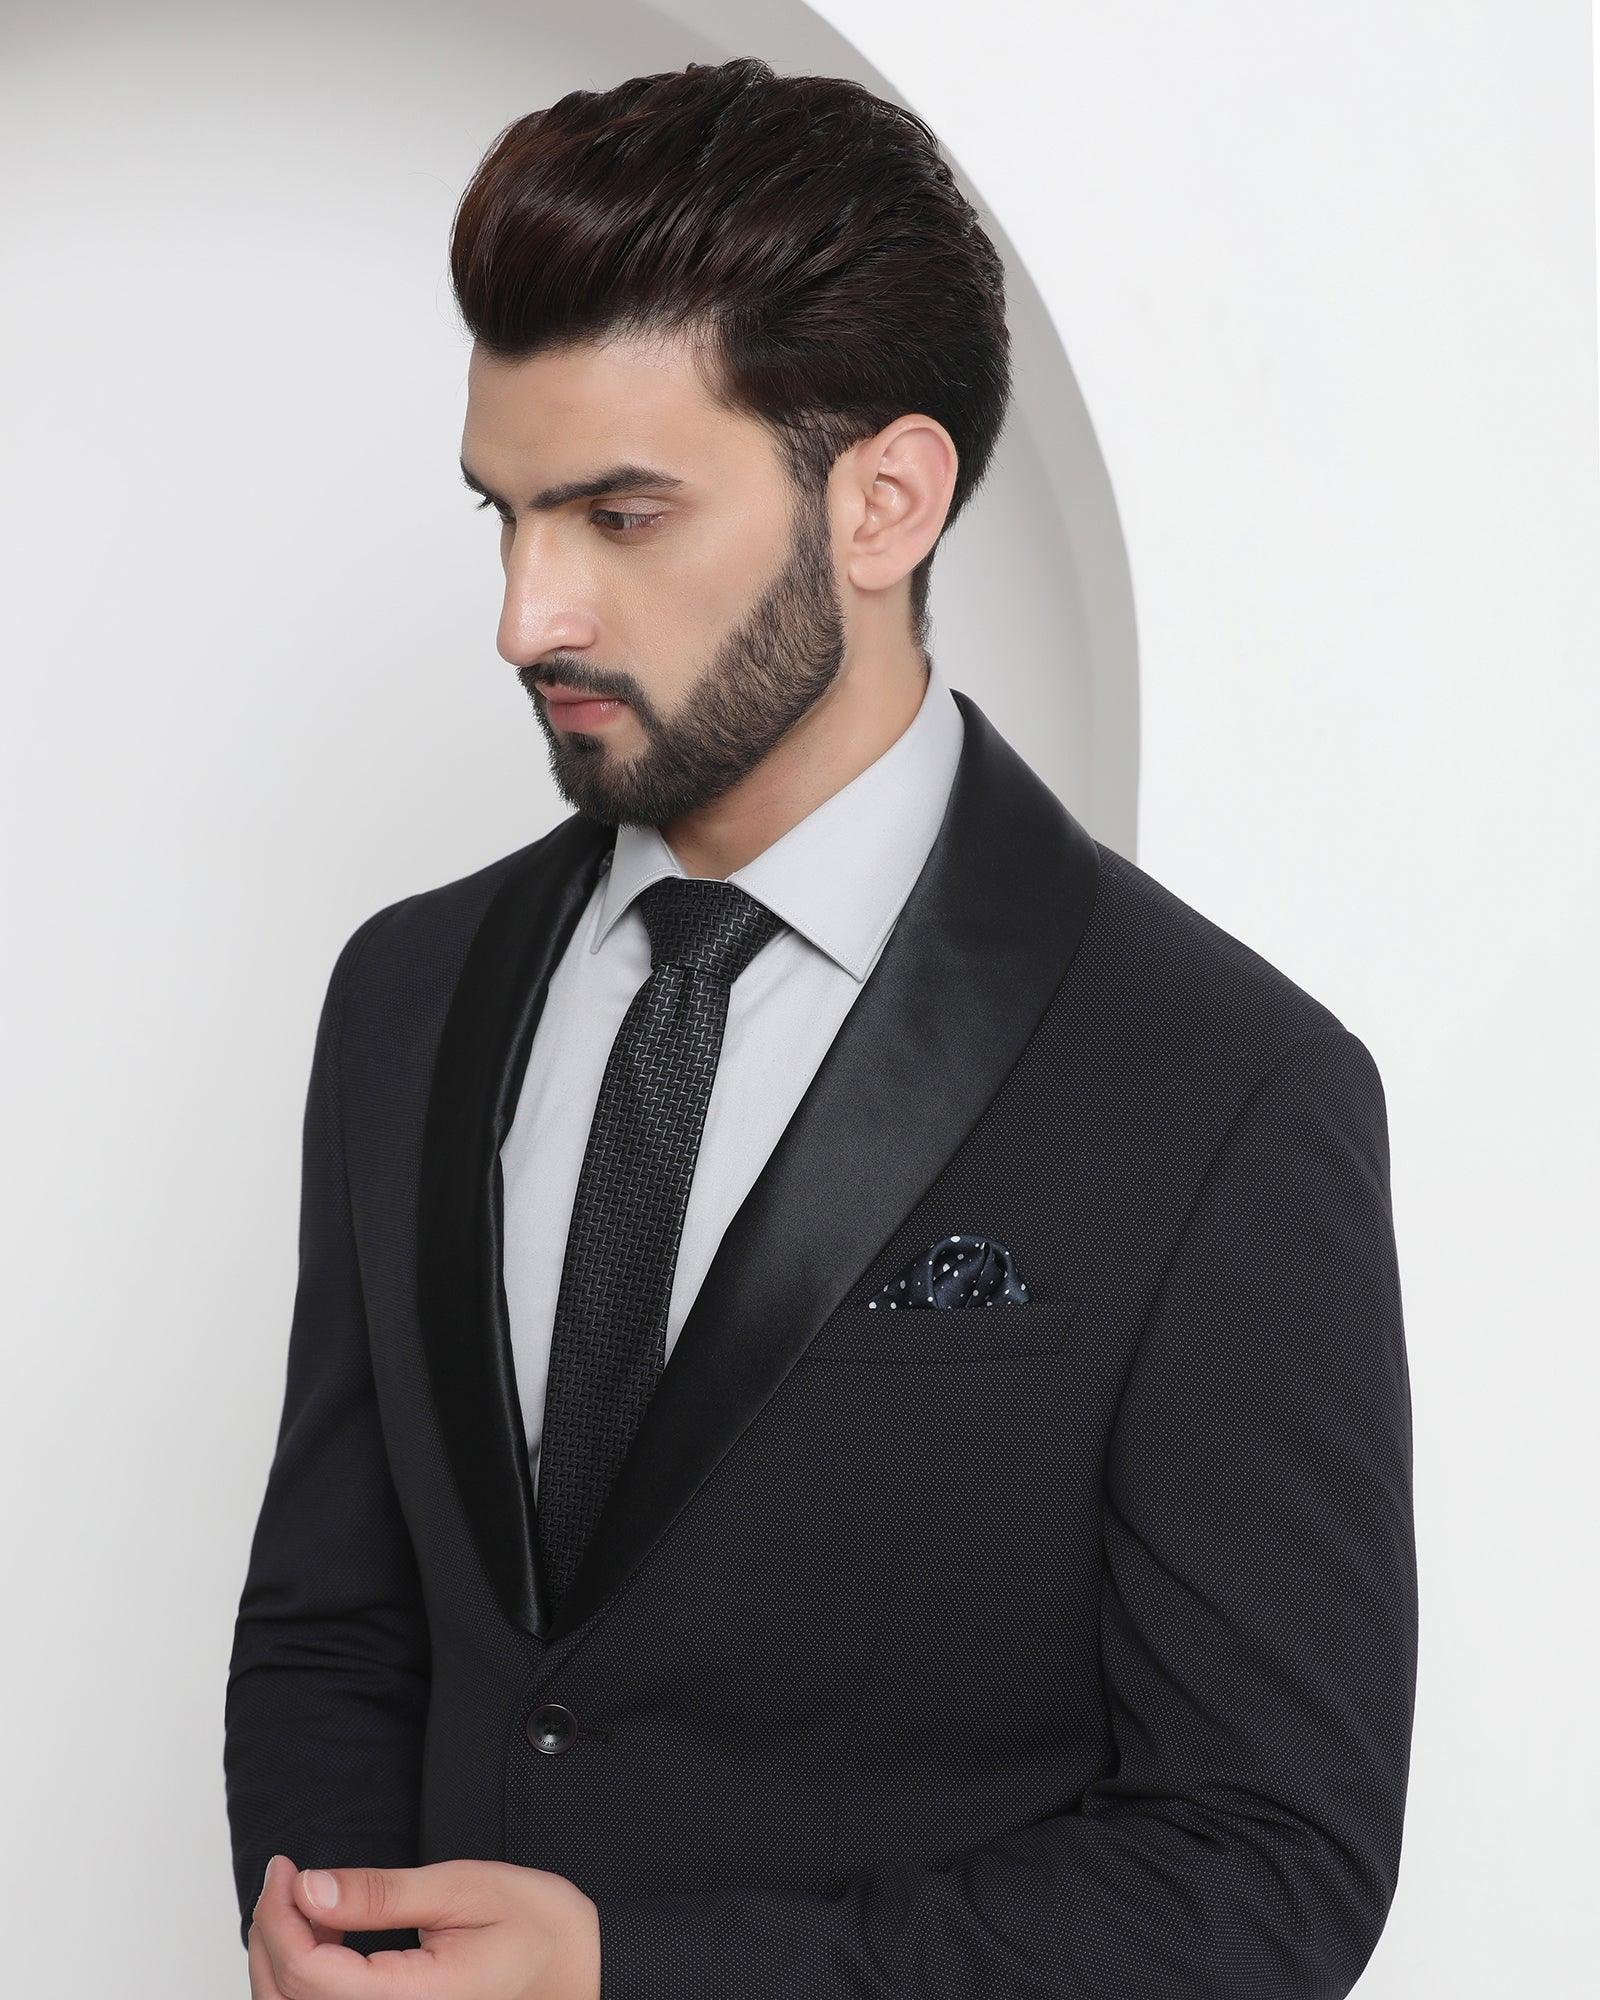 Men's Black Tuxedos and Formal Wear